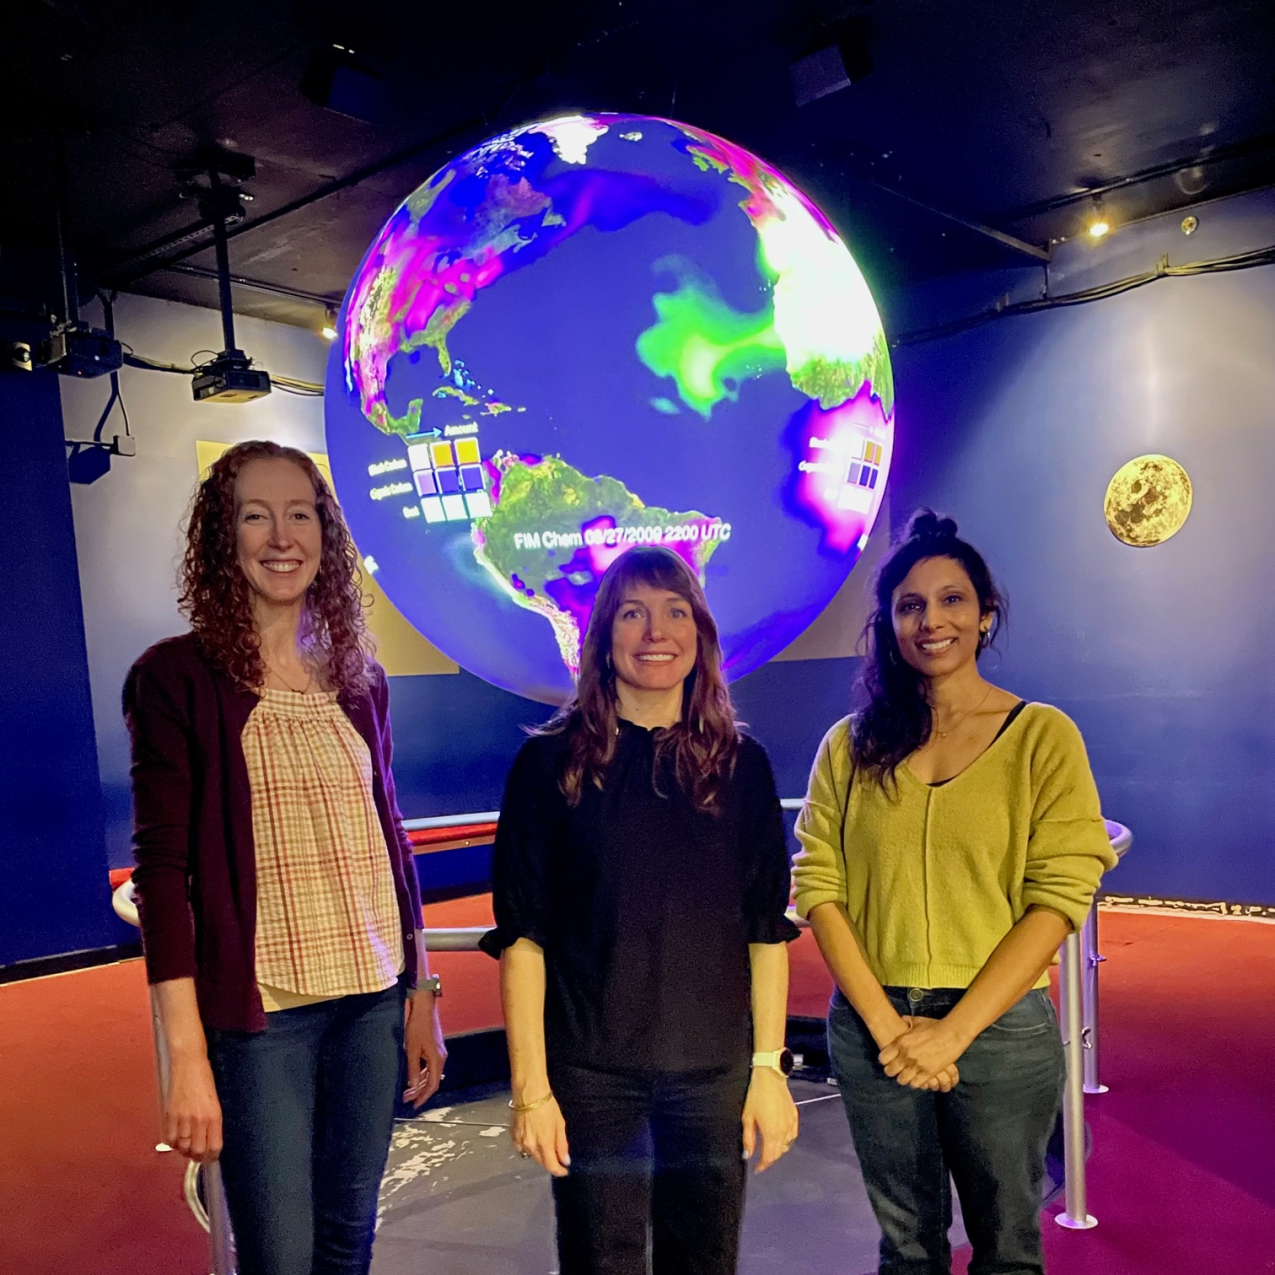 Beth Russell Wehe, Hilary Peddicord, and Shilpi Gupta stand in front of the Science On a Sphere tool, a large globe projector that hangs from the ceiling and projects global science data.